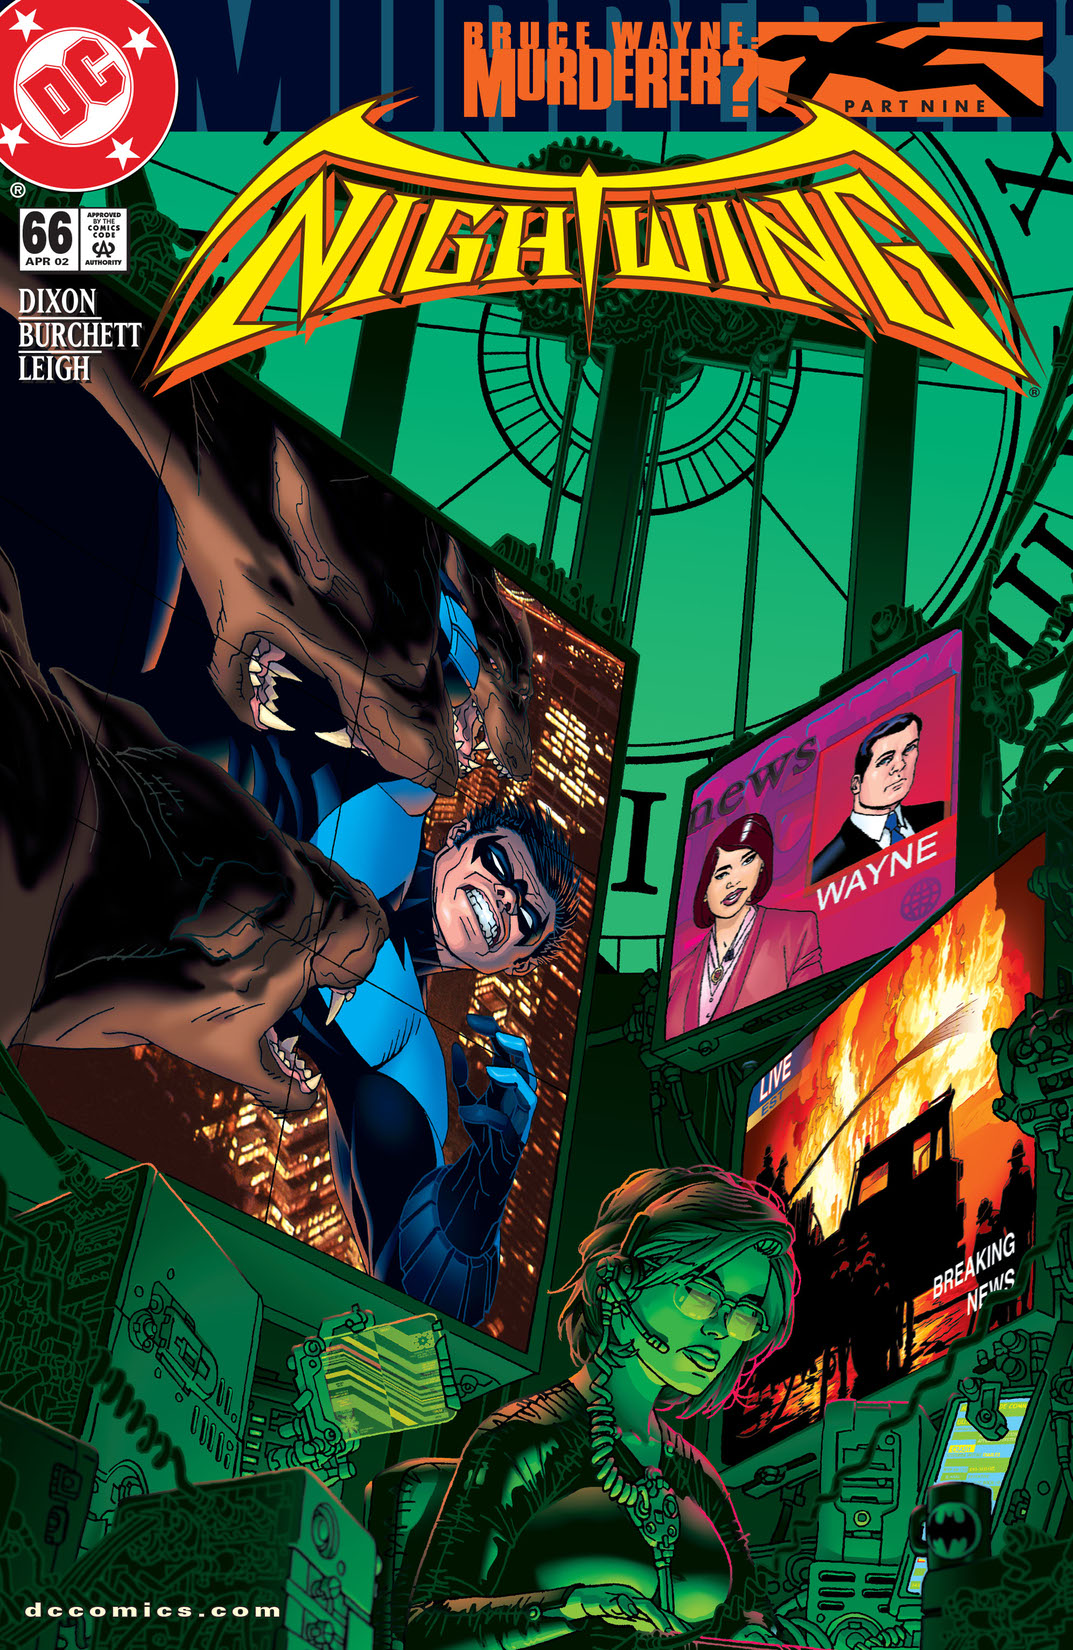 Nightwing (1996-) #66 preview images